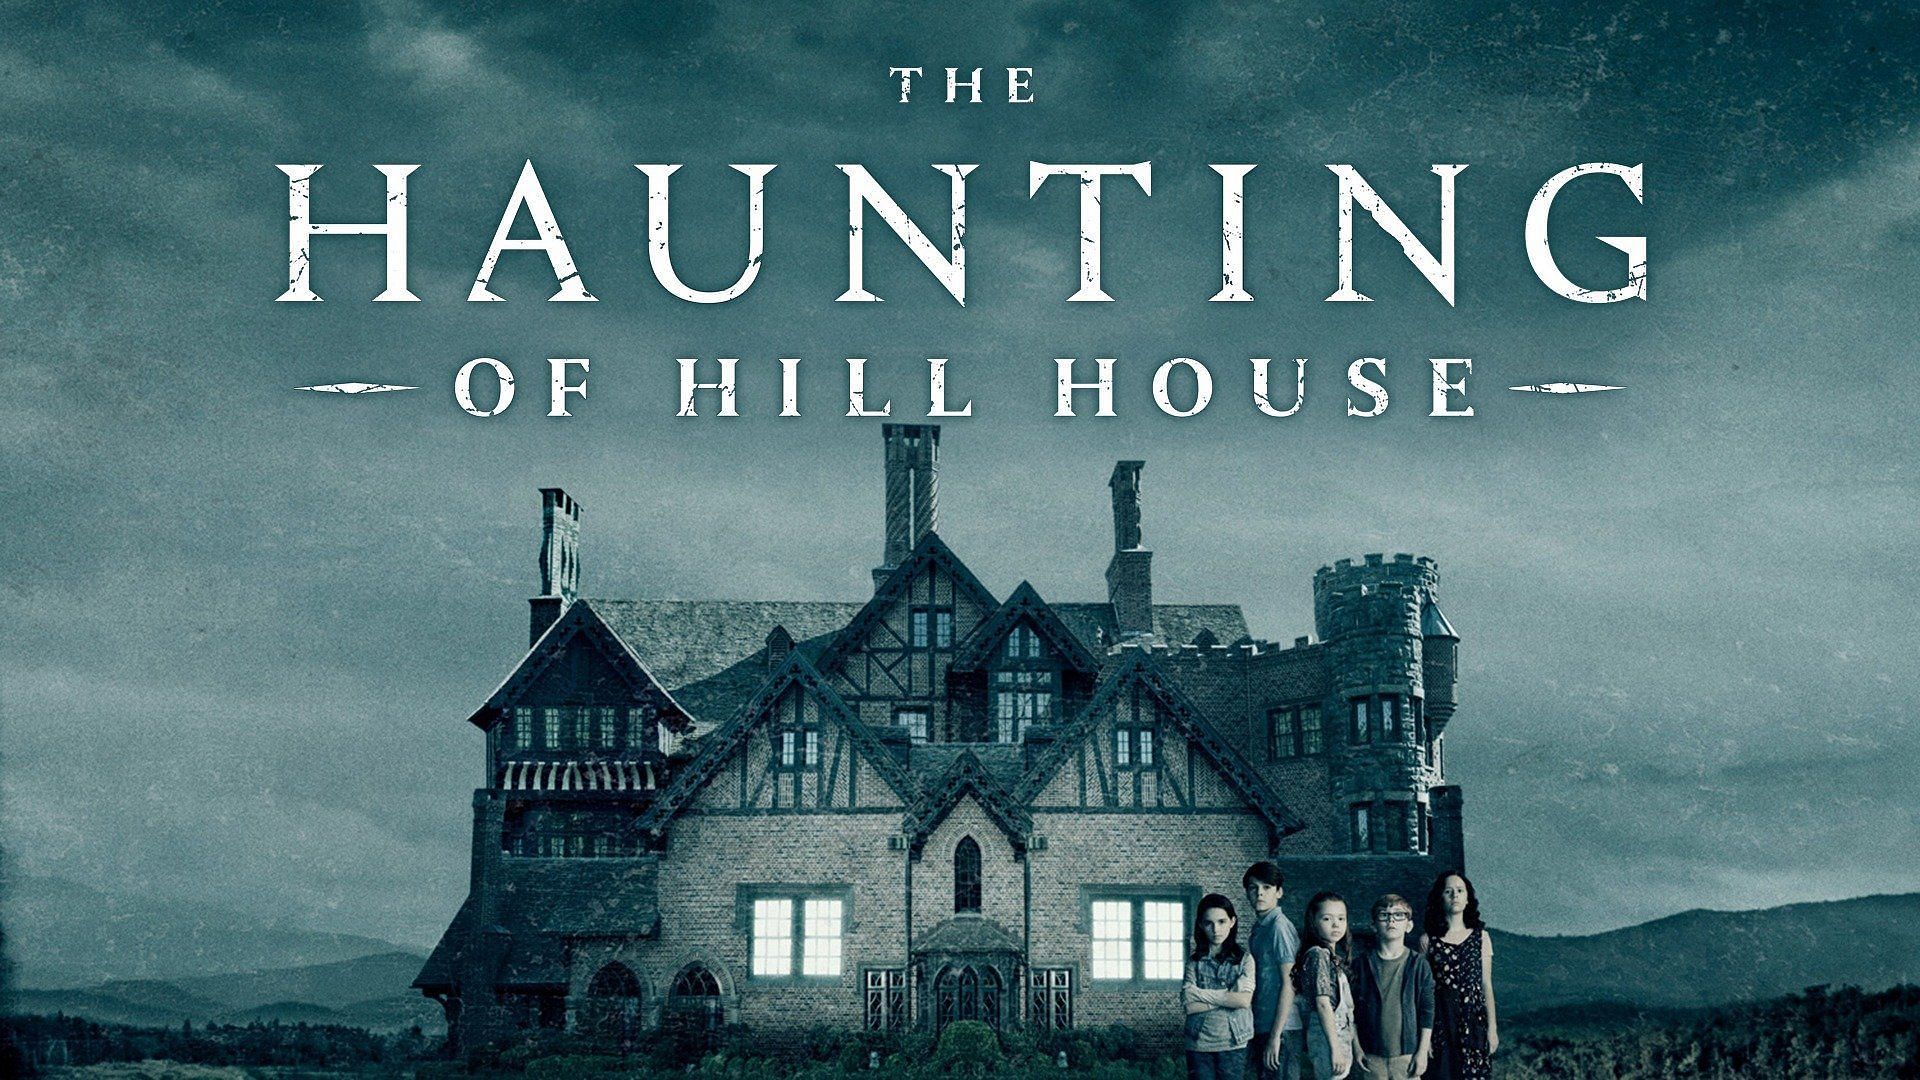 The Haunting of Hill House (Image via Netflix)